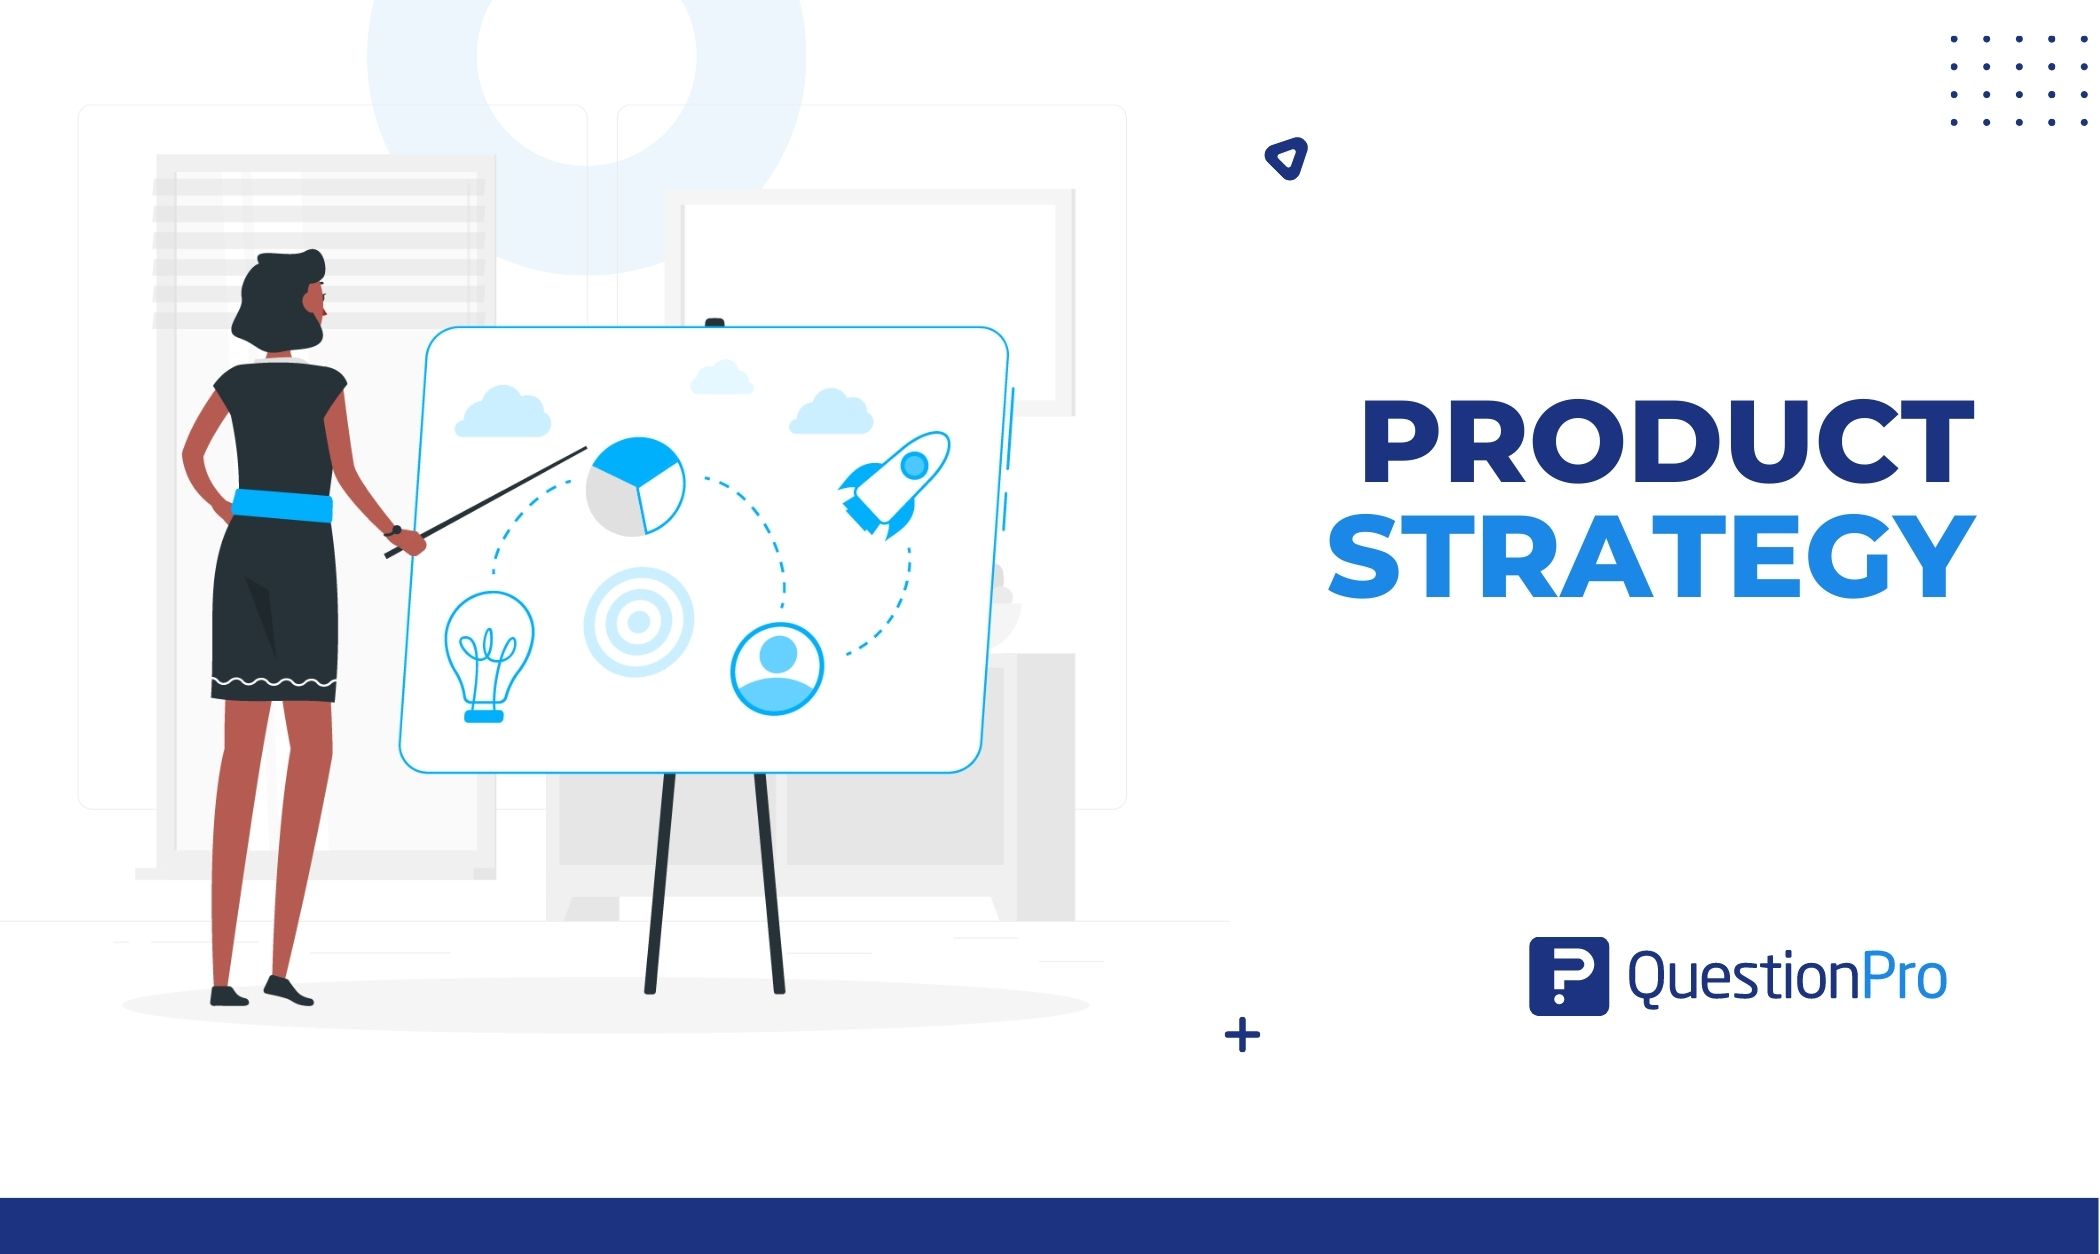 Product strategy is a company's plan to define and implement a product's vision. This explains a product's "big picture". Learn more.